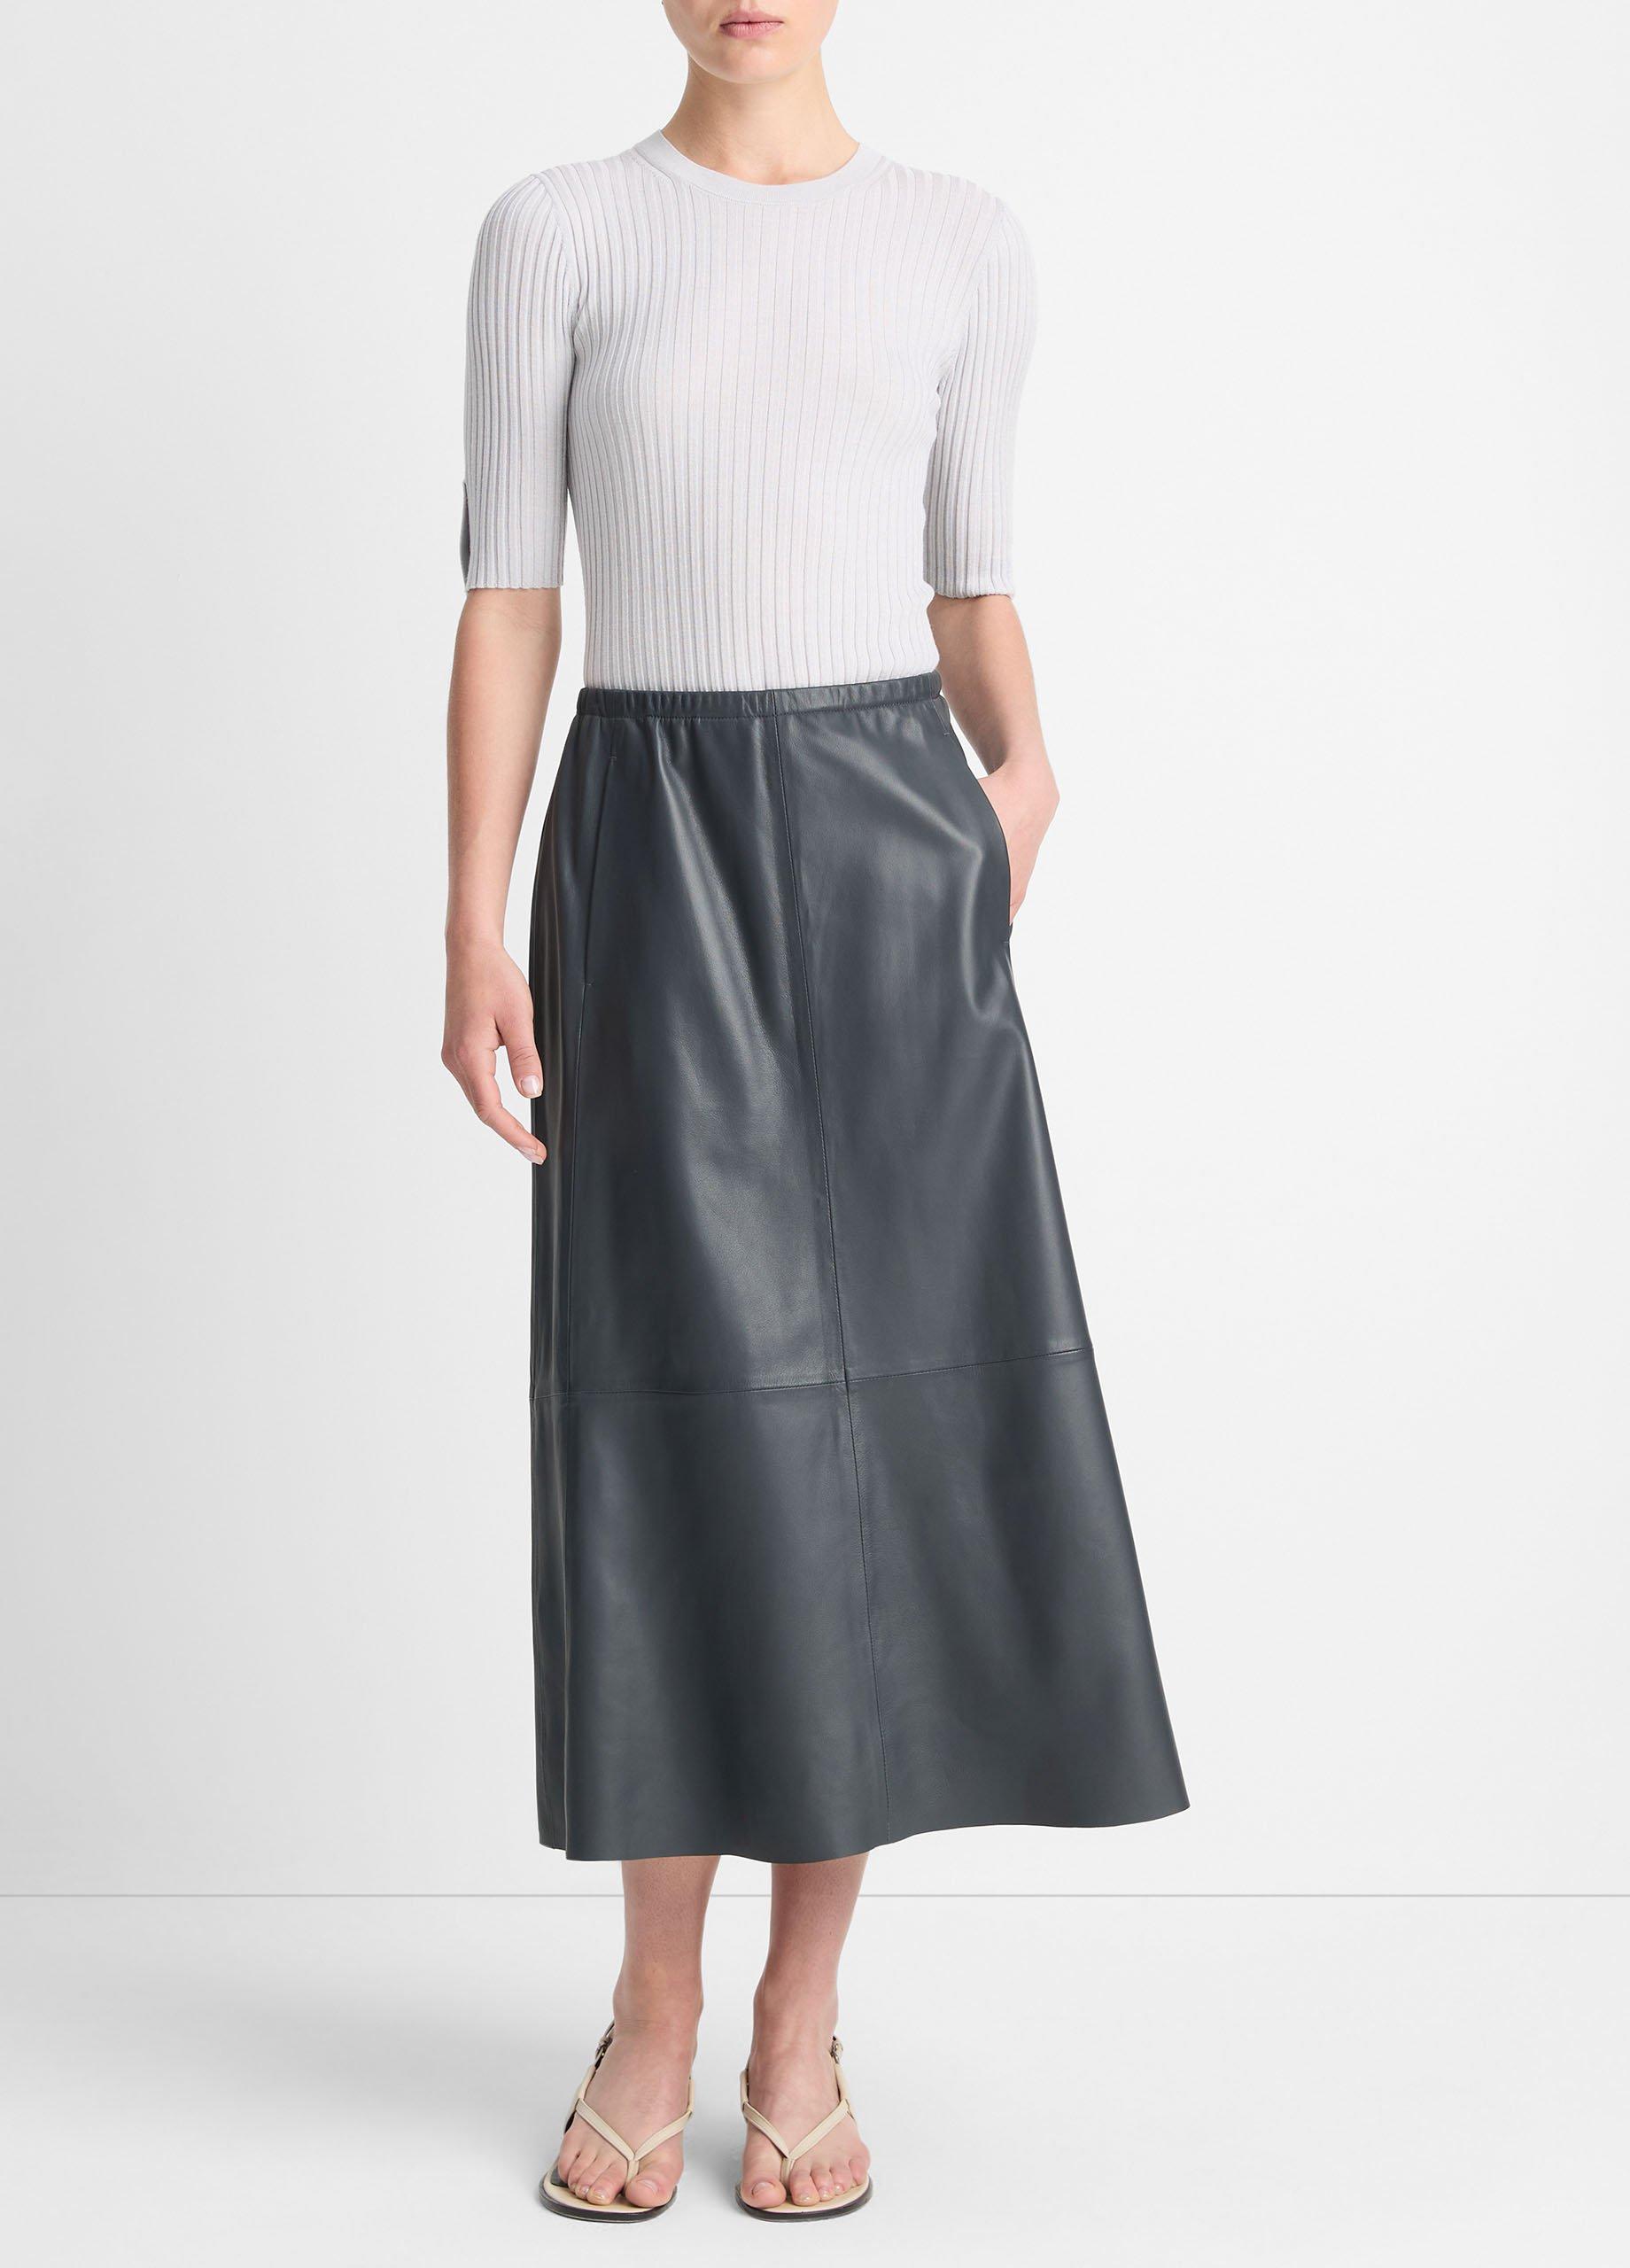 Gathered Leather Mid-Rise Skirt, Graphite, Size XS Vince